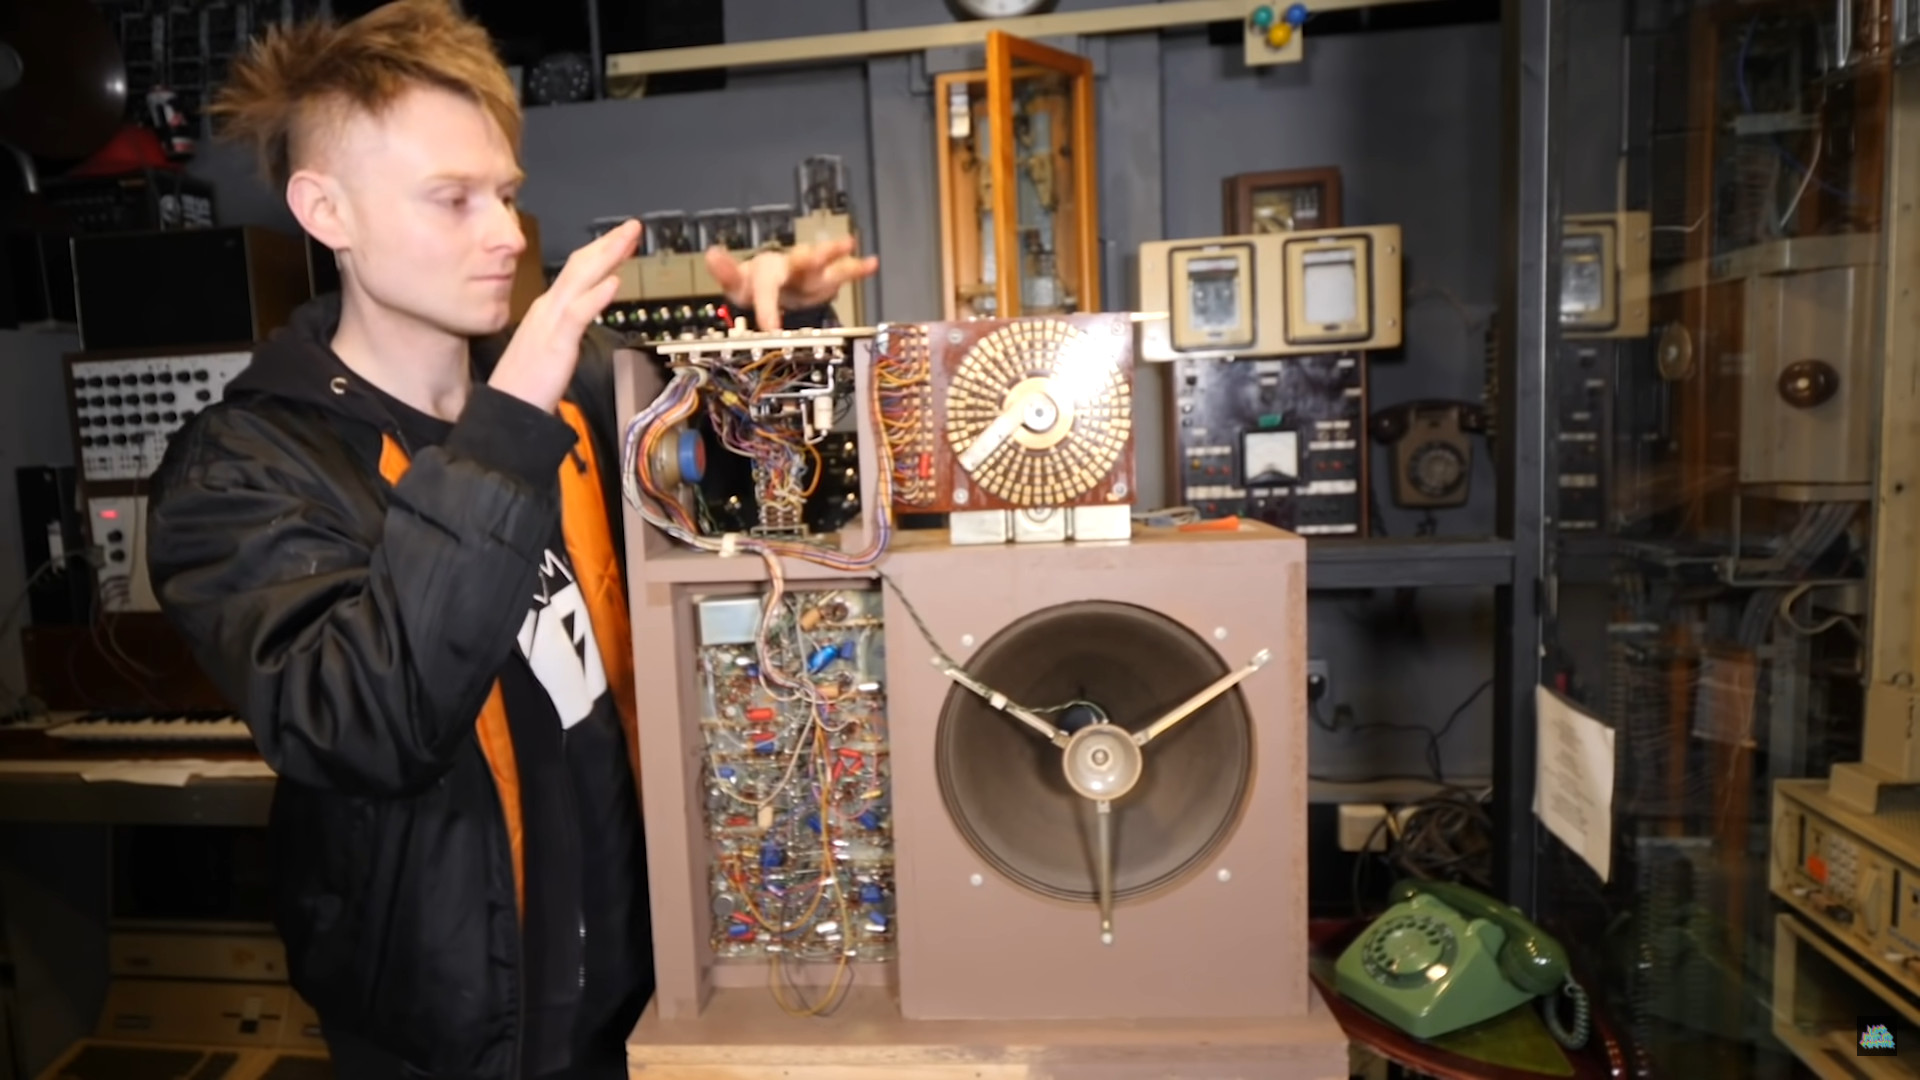 Antique Beat Box Showcases 1950's Engineering Prowess | Hackaday